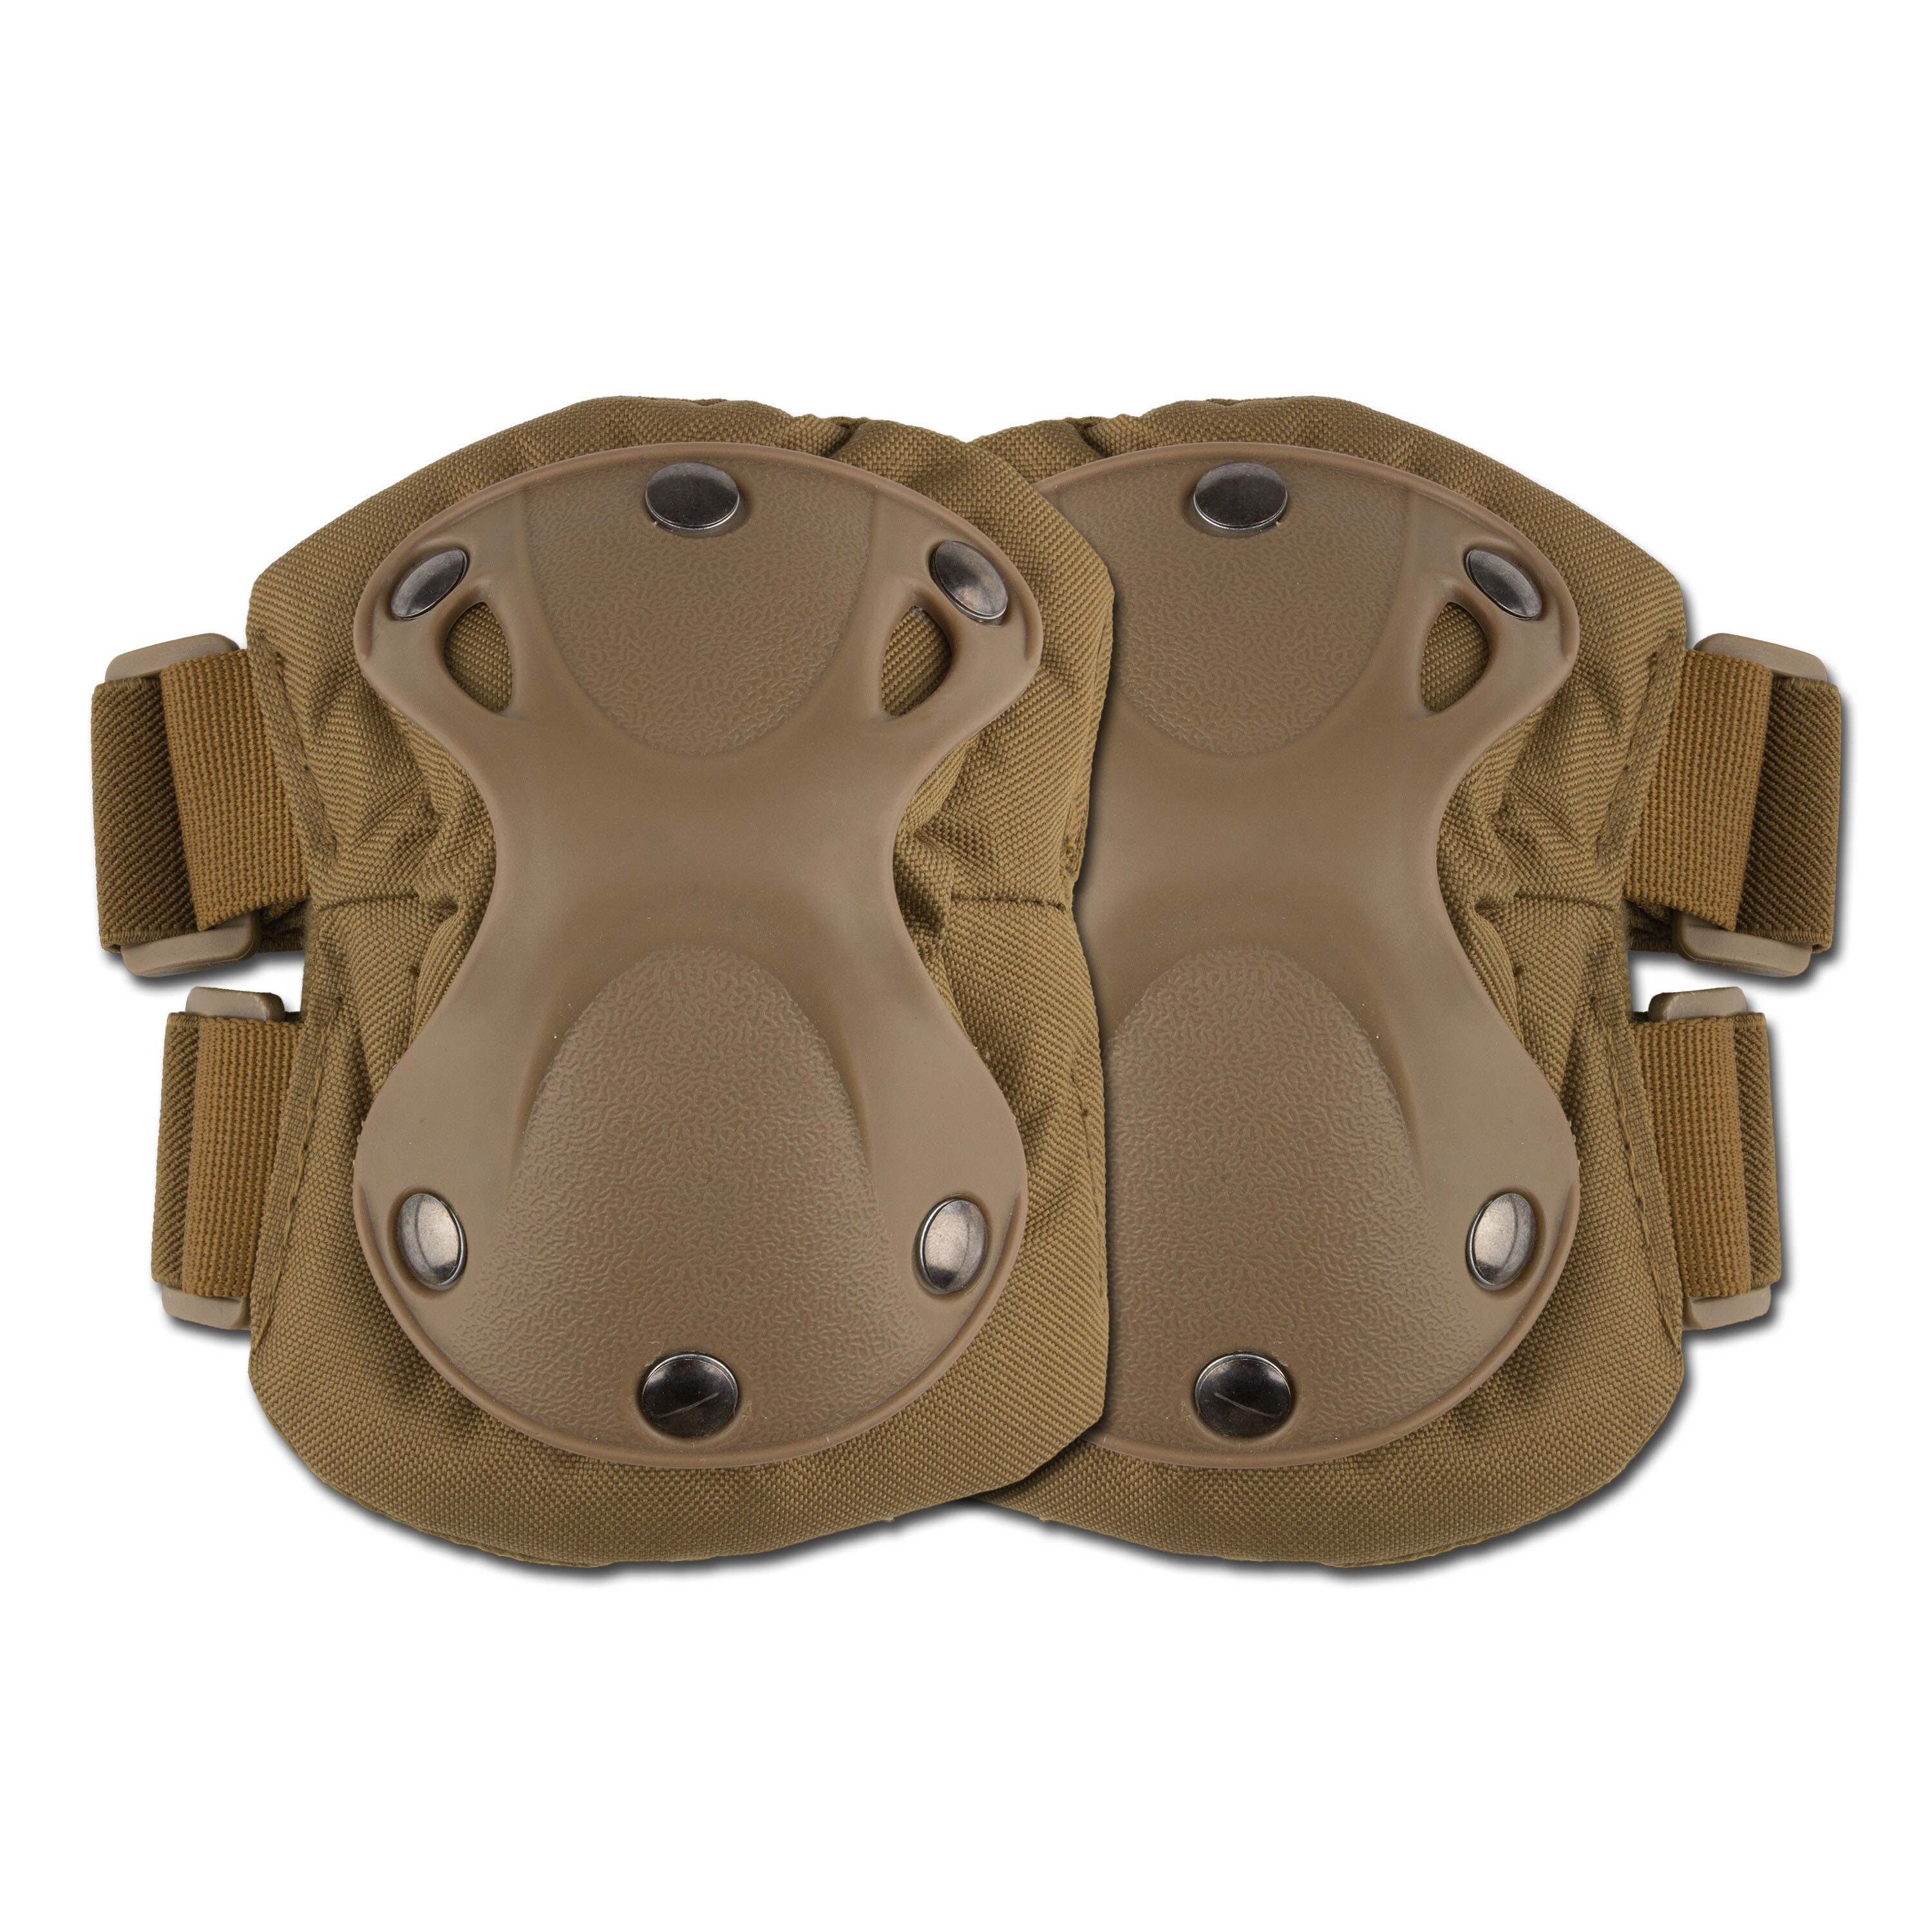 MFH highdefence ELBOW GUARDS DEFENCE Coyote Tan Elle Arch Guards Protectors 